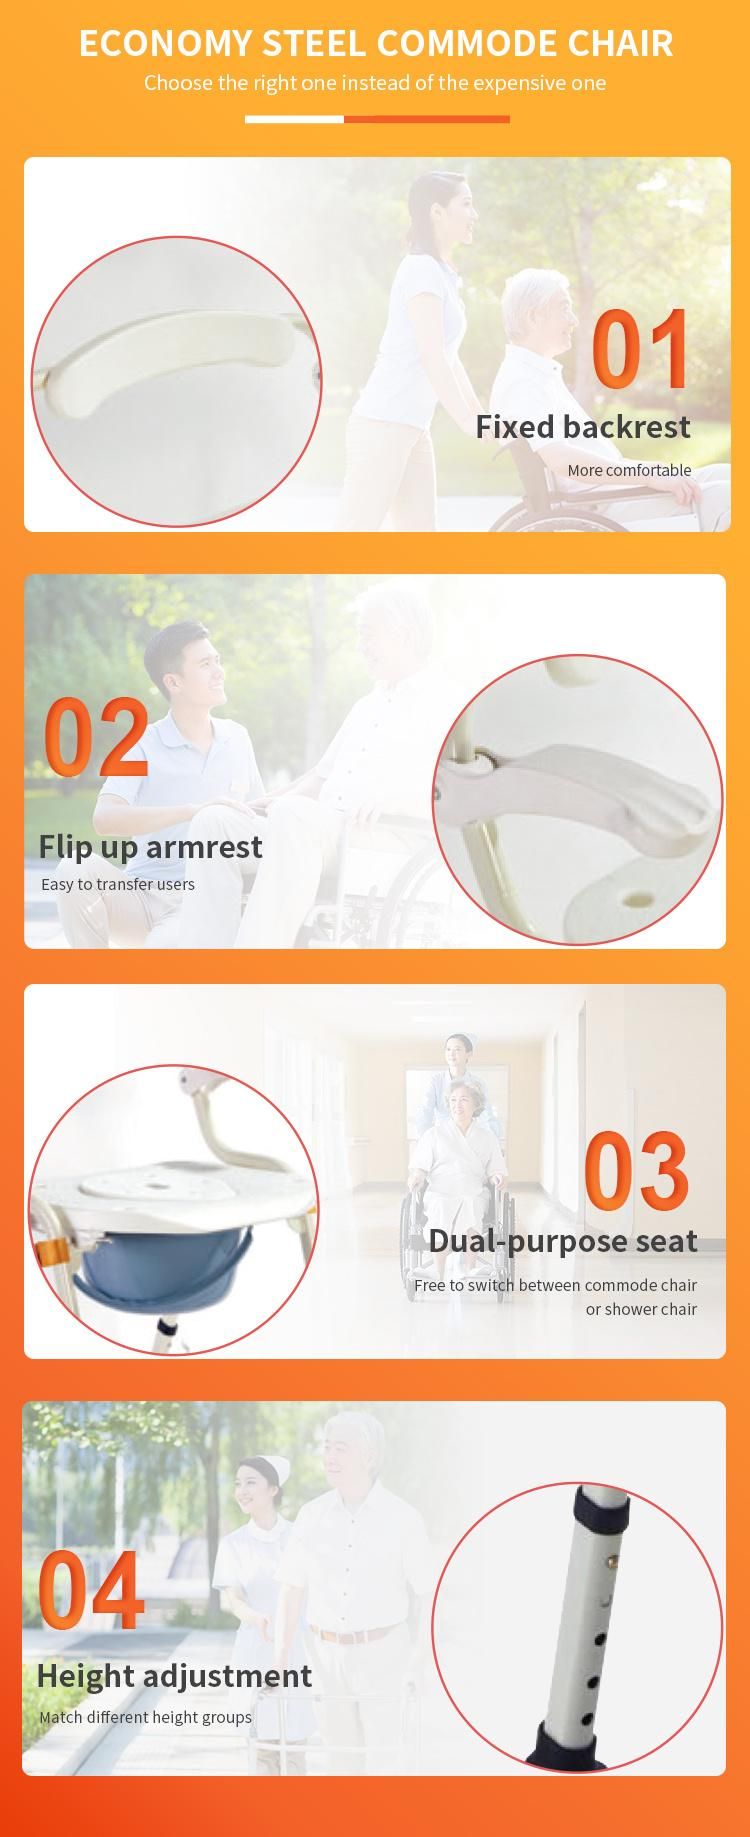 Easy Carry Folding Stand up Shower Commode Chair Adjustable Height Chair Hot Selling Non-Slip Foot Pad Steel Shower Commode Toilet Seat Medical Equipment